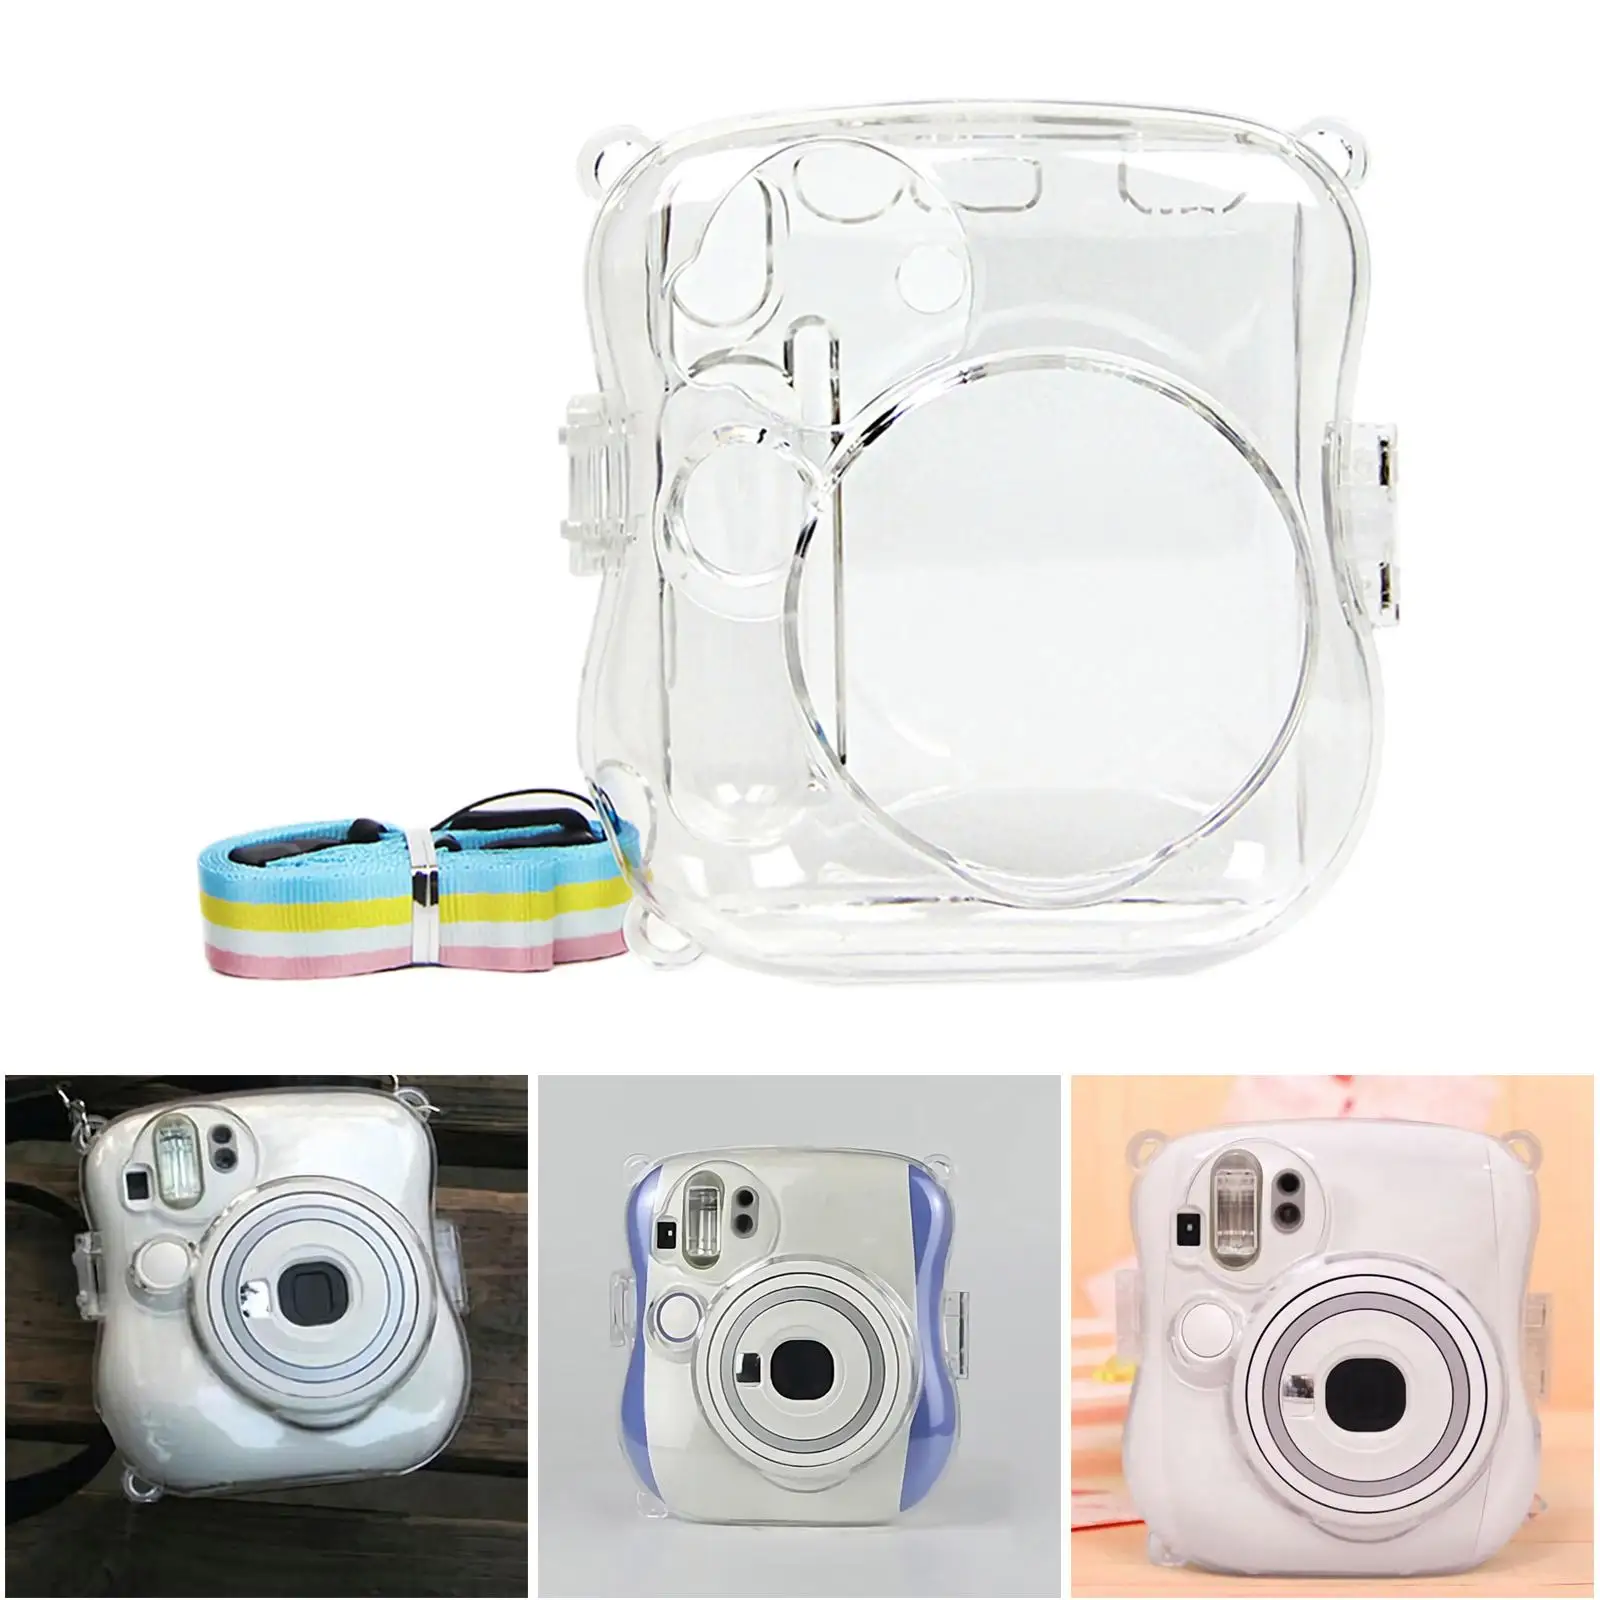 Crystal Camera Protective Case W/ Rainbow Shoulder Strap Transparent Premium Cover Shell Bag for Instax Mini 25 Holiday Travel